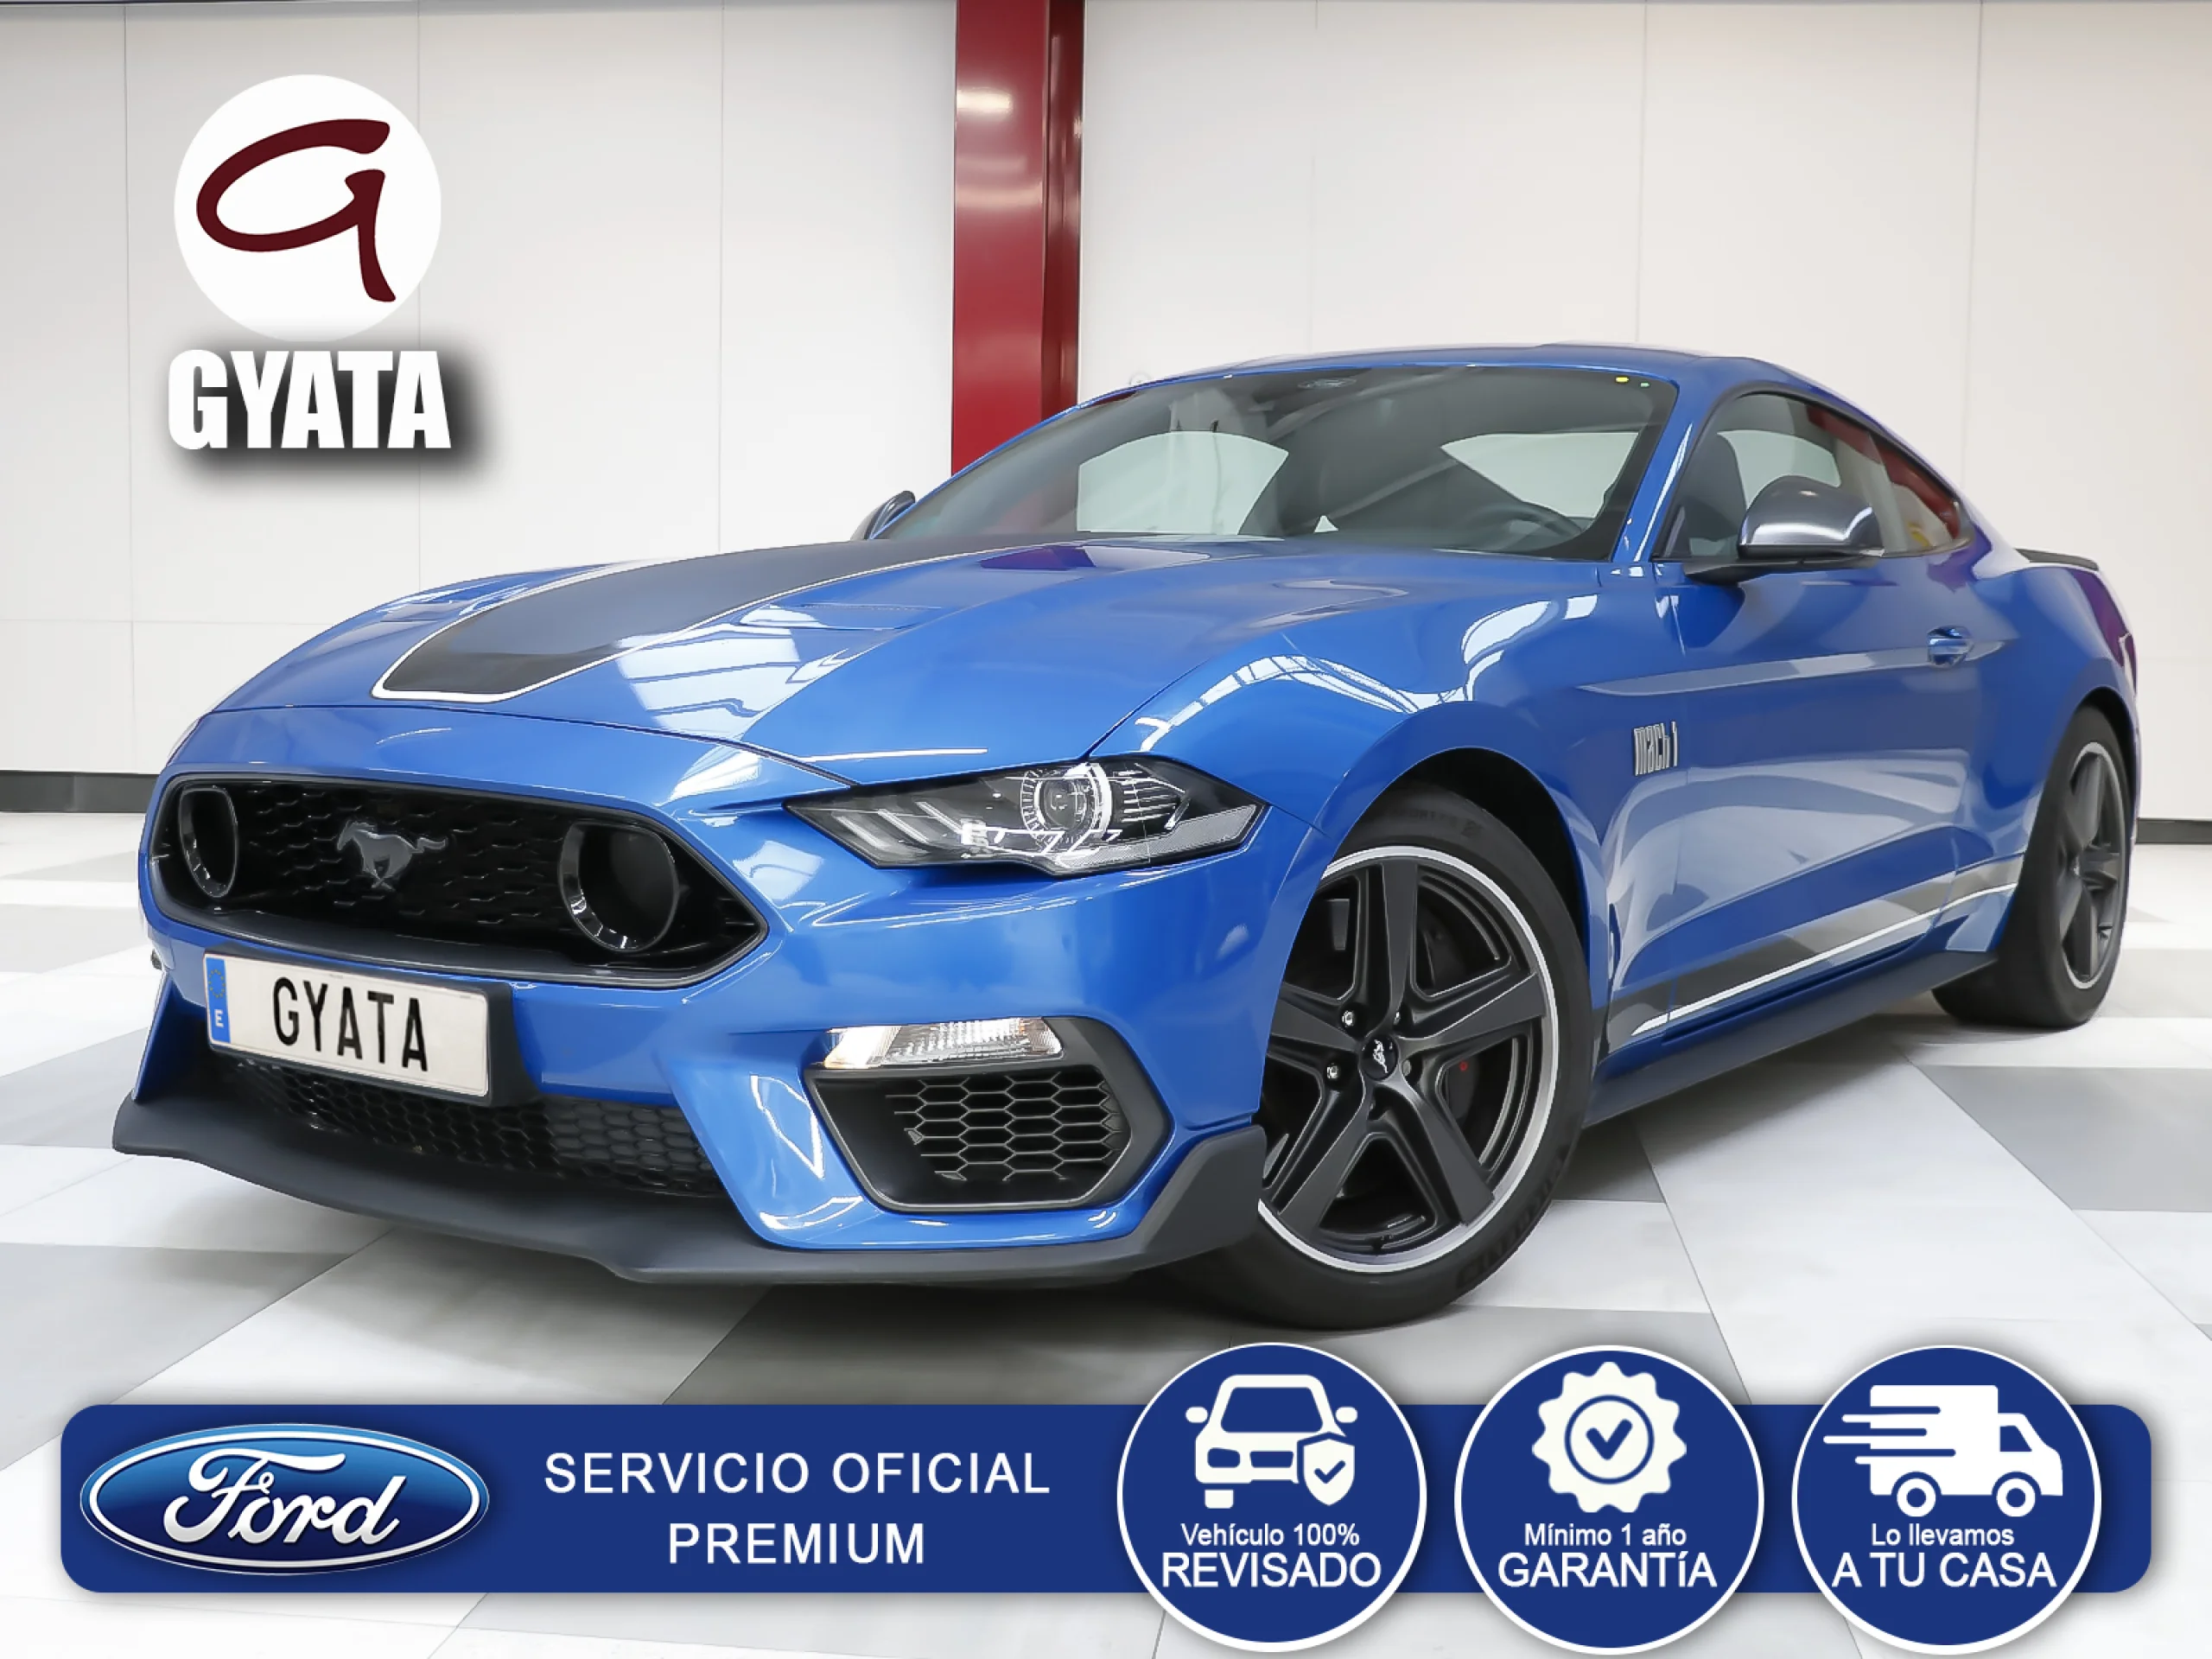 Ford Mustang 5.0 Ti-VCT Coupe Mach I 338 kW (459 CV) - Foto 1